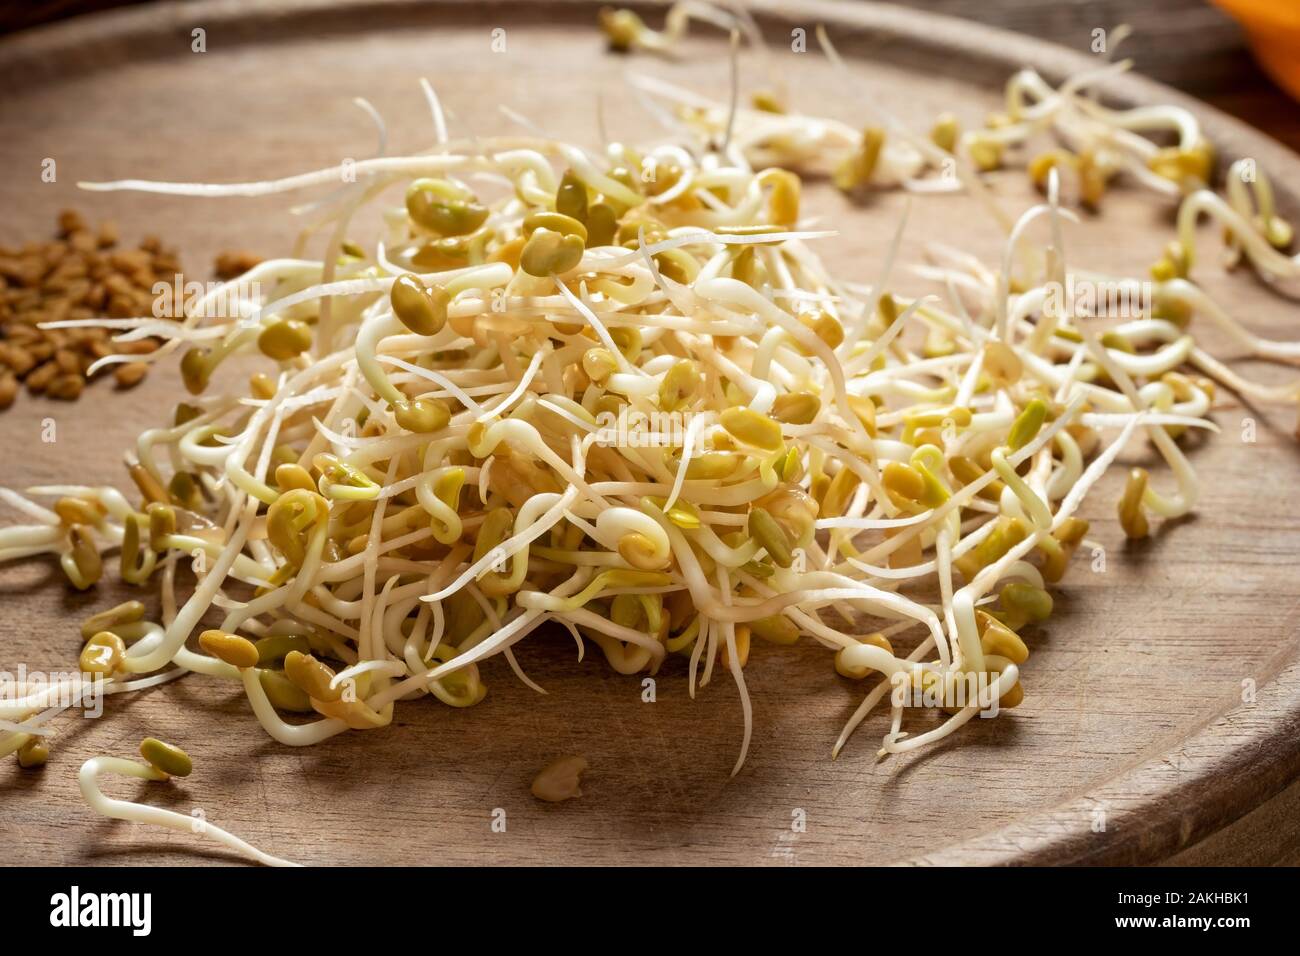 Fenugreek sprouts and dry seeds in the background Stock Photo